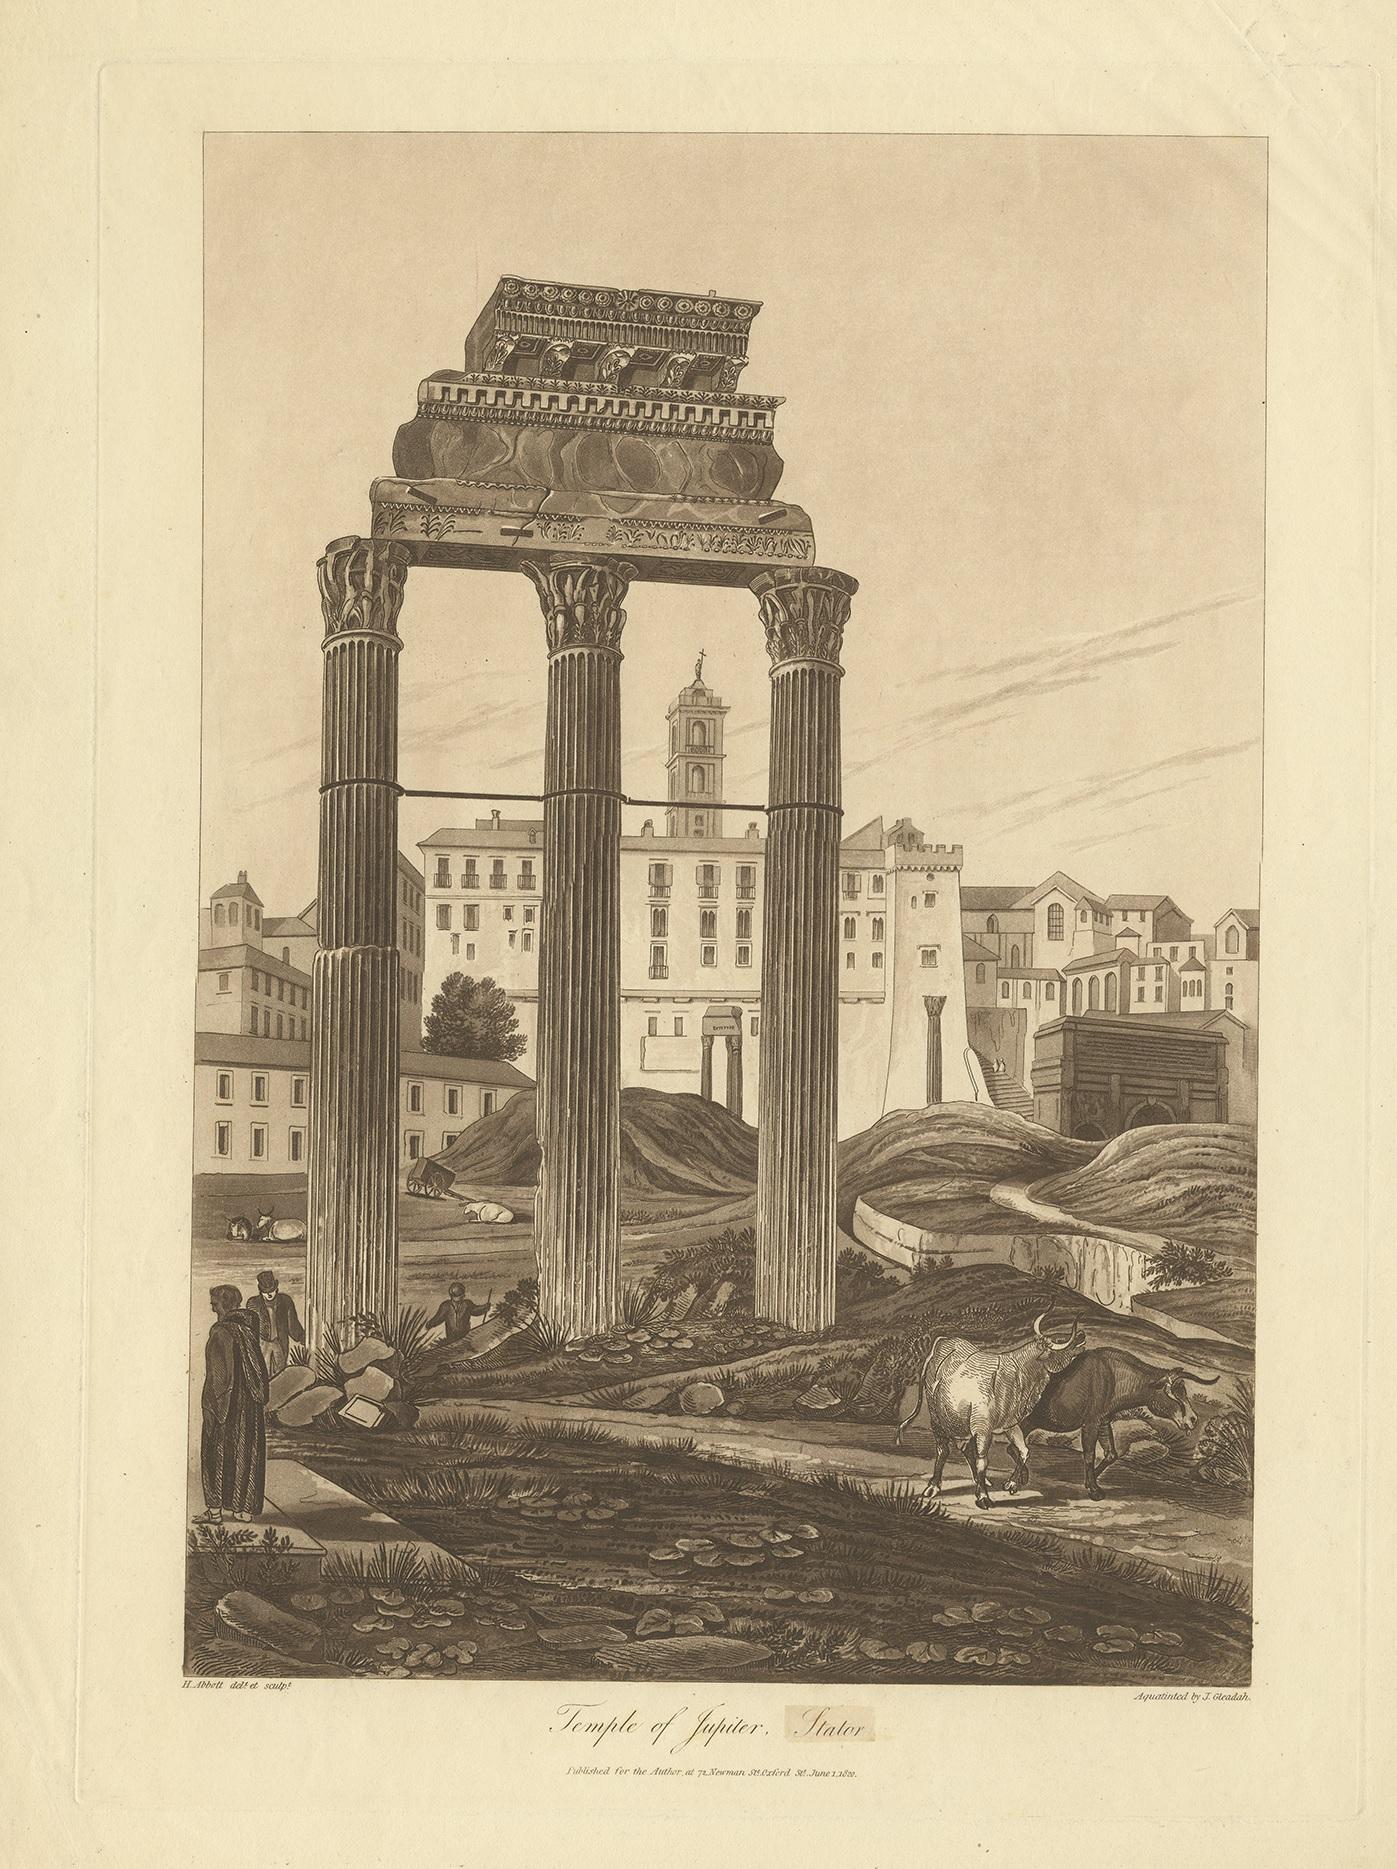 Antique print titled 'Temple of Jupiter Stator'. Large aquatint of the Temple of Jupiter Stator. The Temple of Jupiter Stator was a sanctuary on the slope of the Capitoline Hill. In Roman legend, it was founded by King Romulus after he pledged to